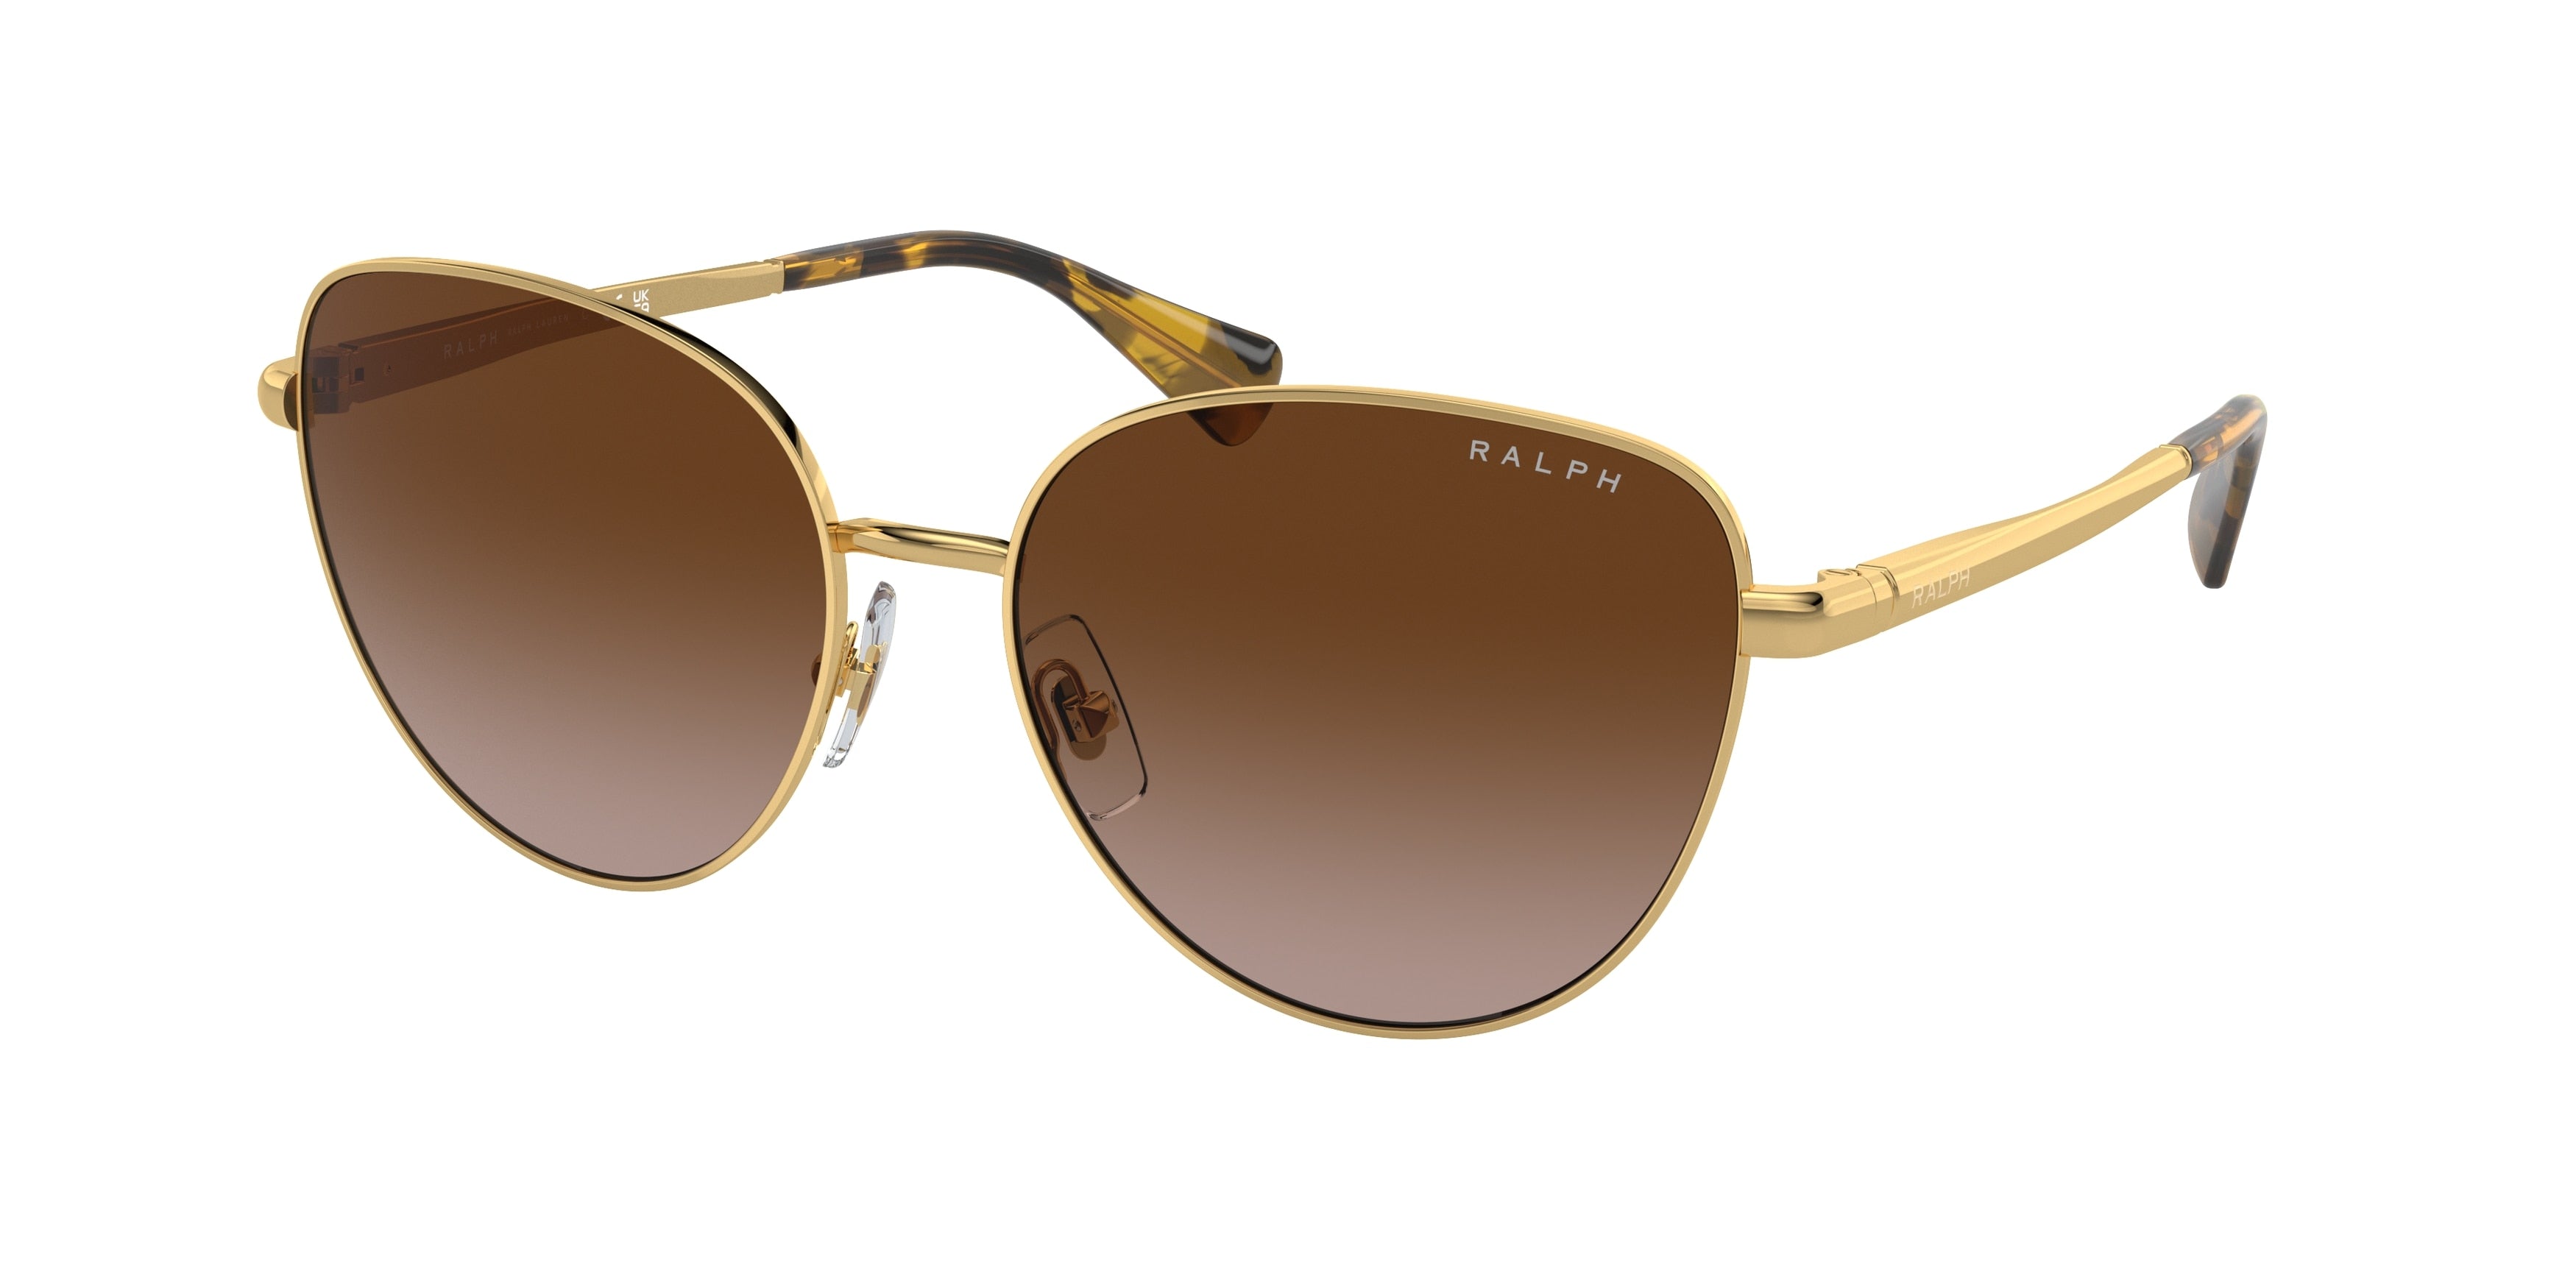 Ralph RA4144 Butterfly Sunglasses  900413-Shiny Gold 58-145-16 - Color Map Gold